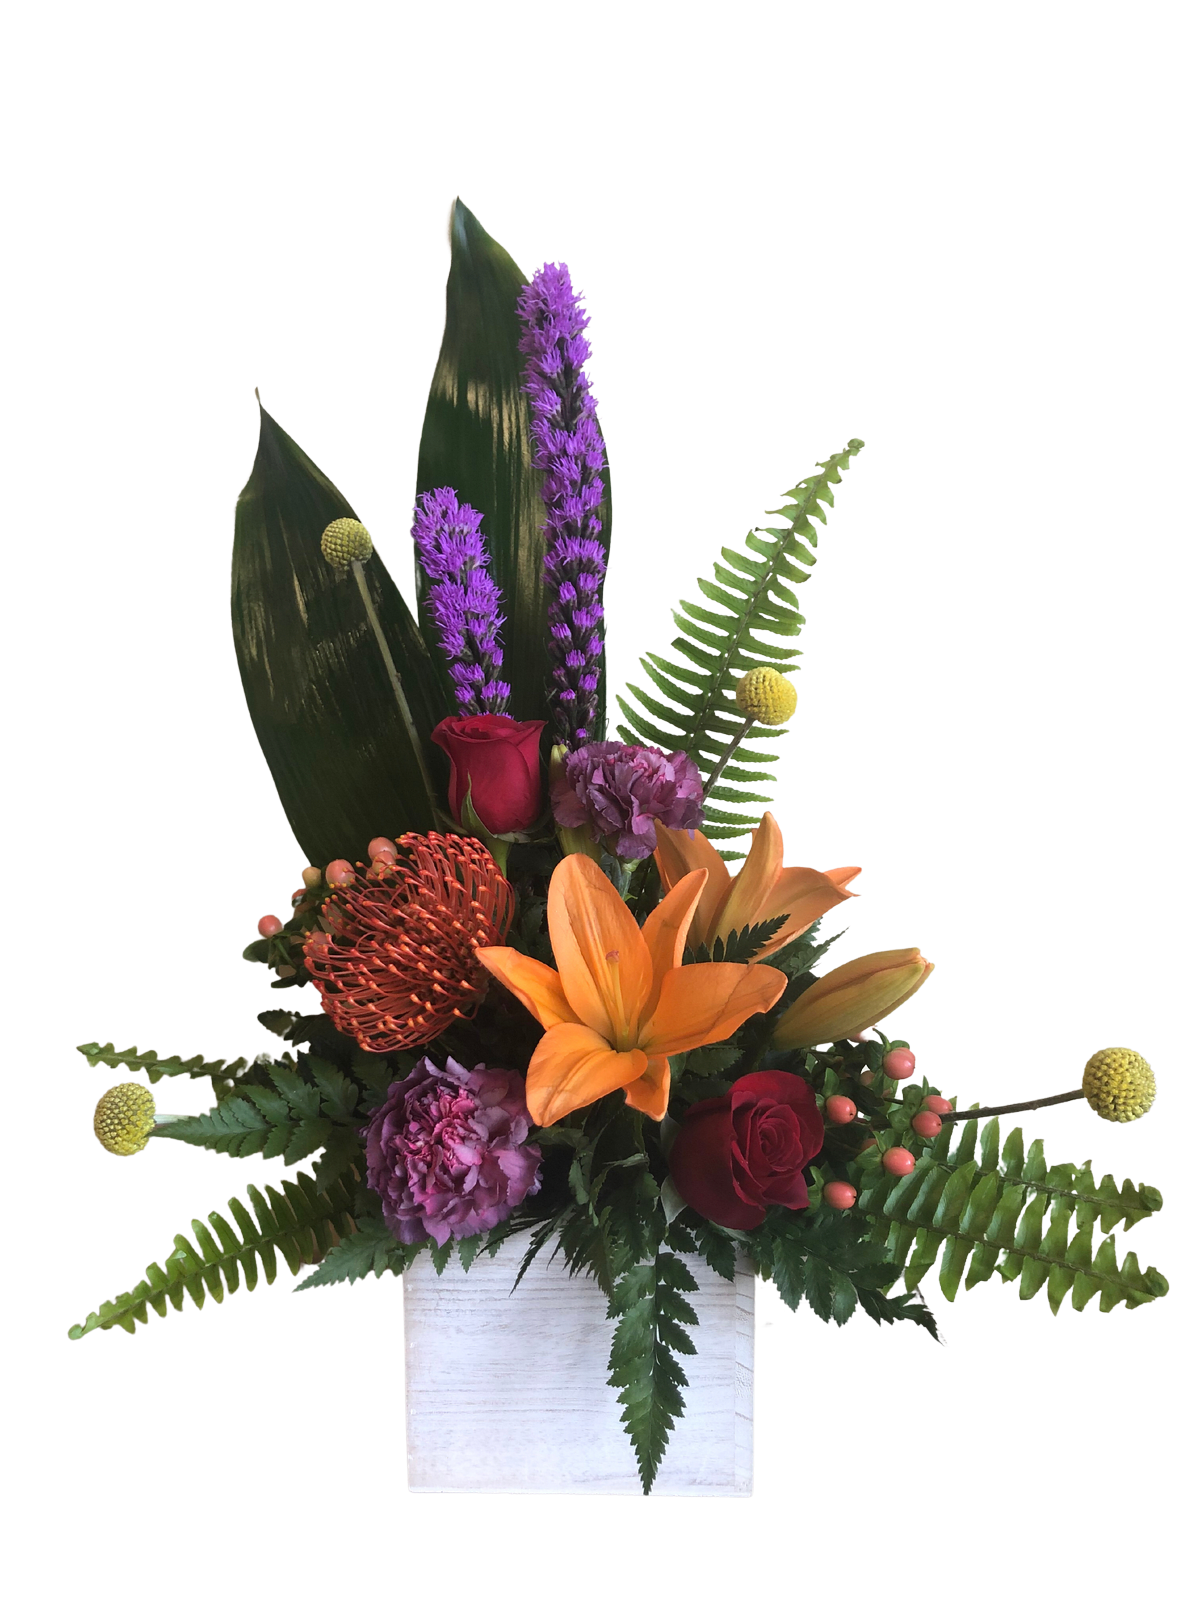 Bahama Mama - Tropical Mix of Liatris, Billy Balls, Protea, Asiatic Lilies, Roses, Carnations, Hypericum with Boston Fern and Aspedistra Leaves in wooden cube